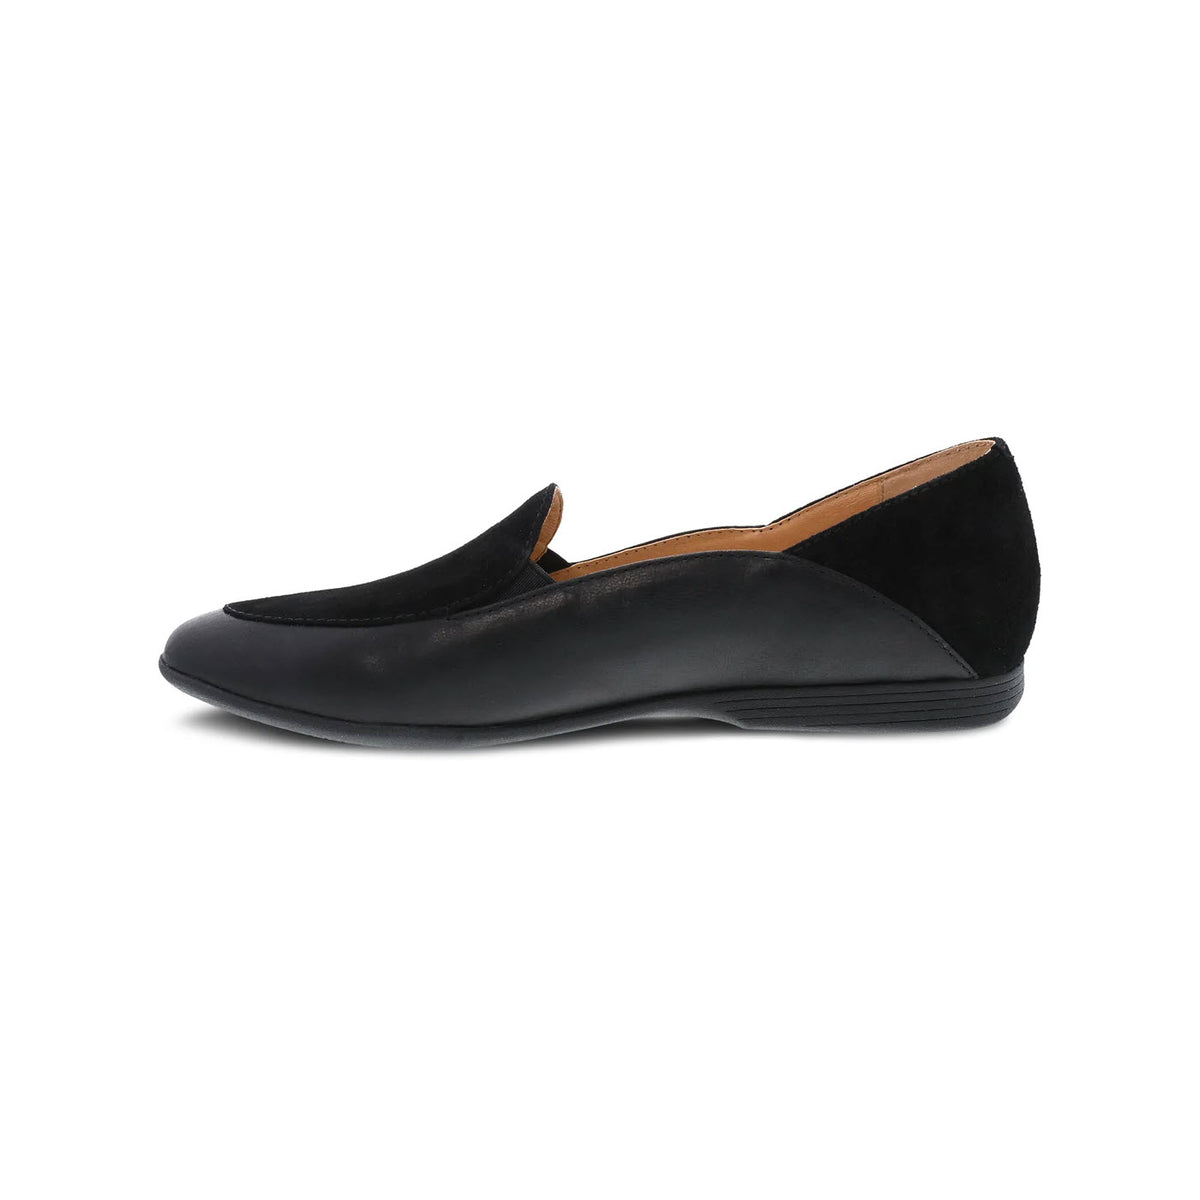 Dansko Lace Black Glazed - Women&#39;s buttery soft leather flat shoe with a low heel and rounded toe, isolated on a white background.